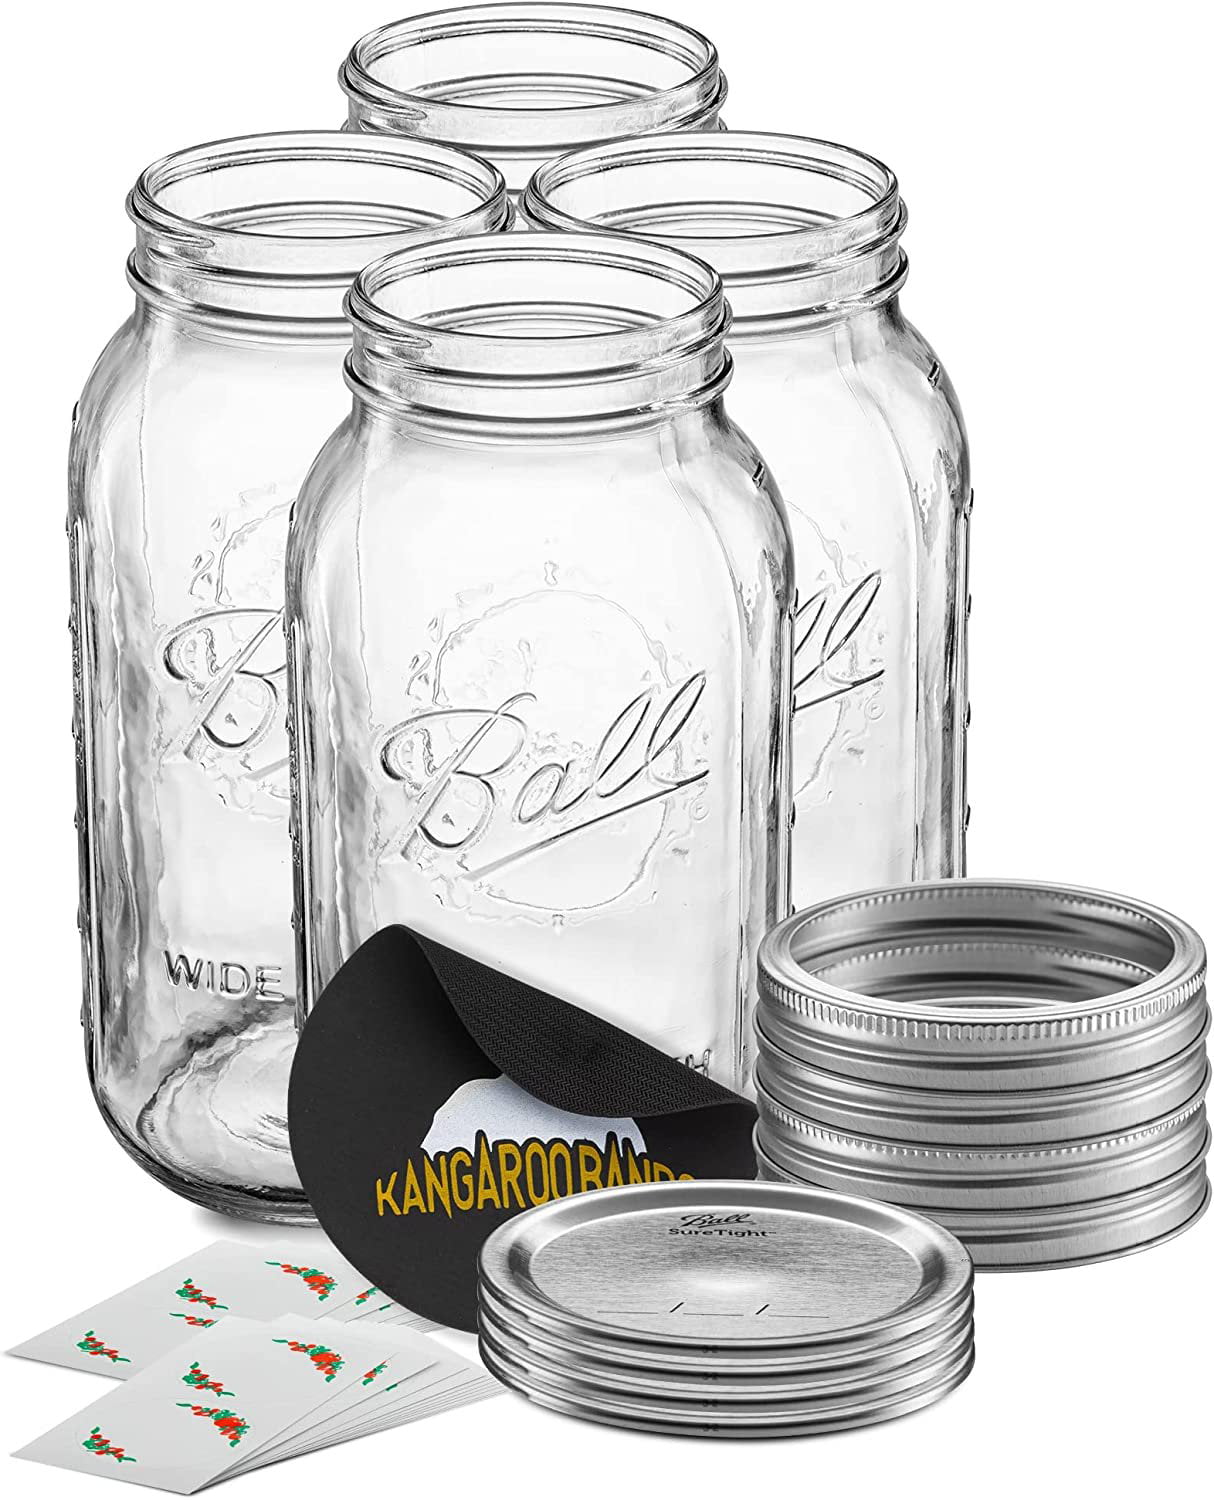 Ball 64 oz. Wide Mouth Half Gallon Jars (Pack of 6) 68100 - The Home Depot